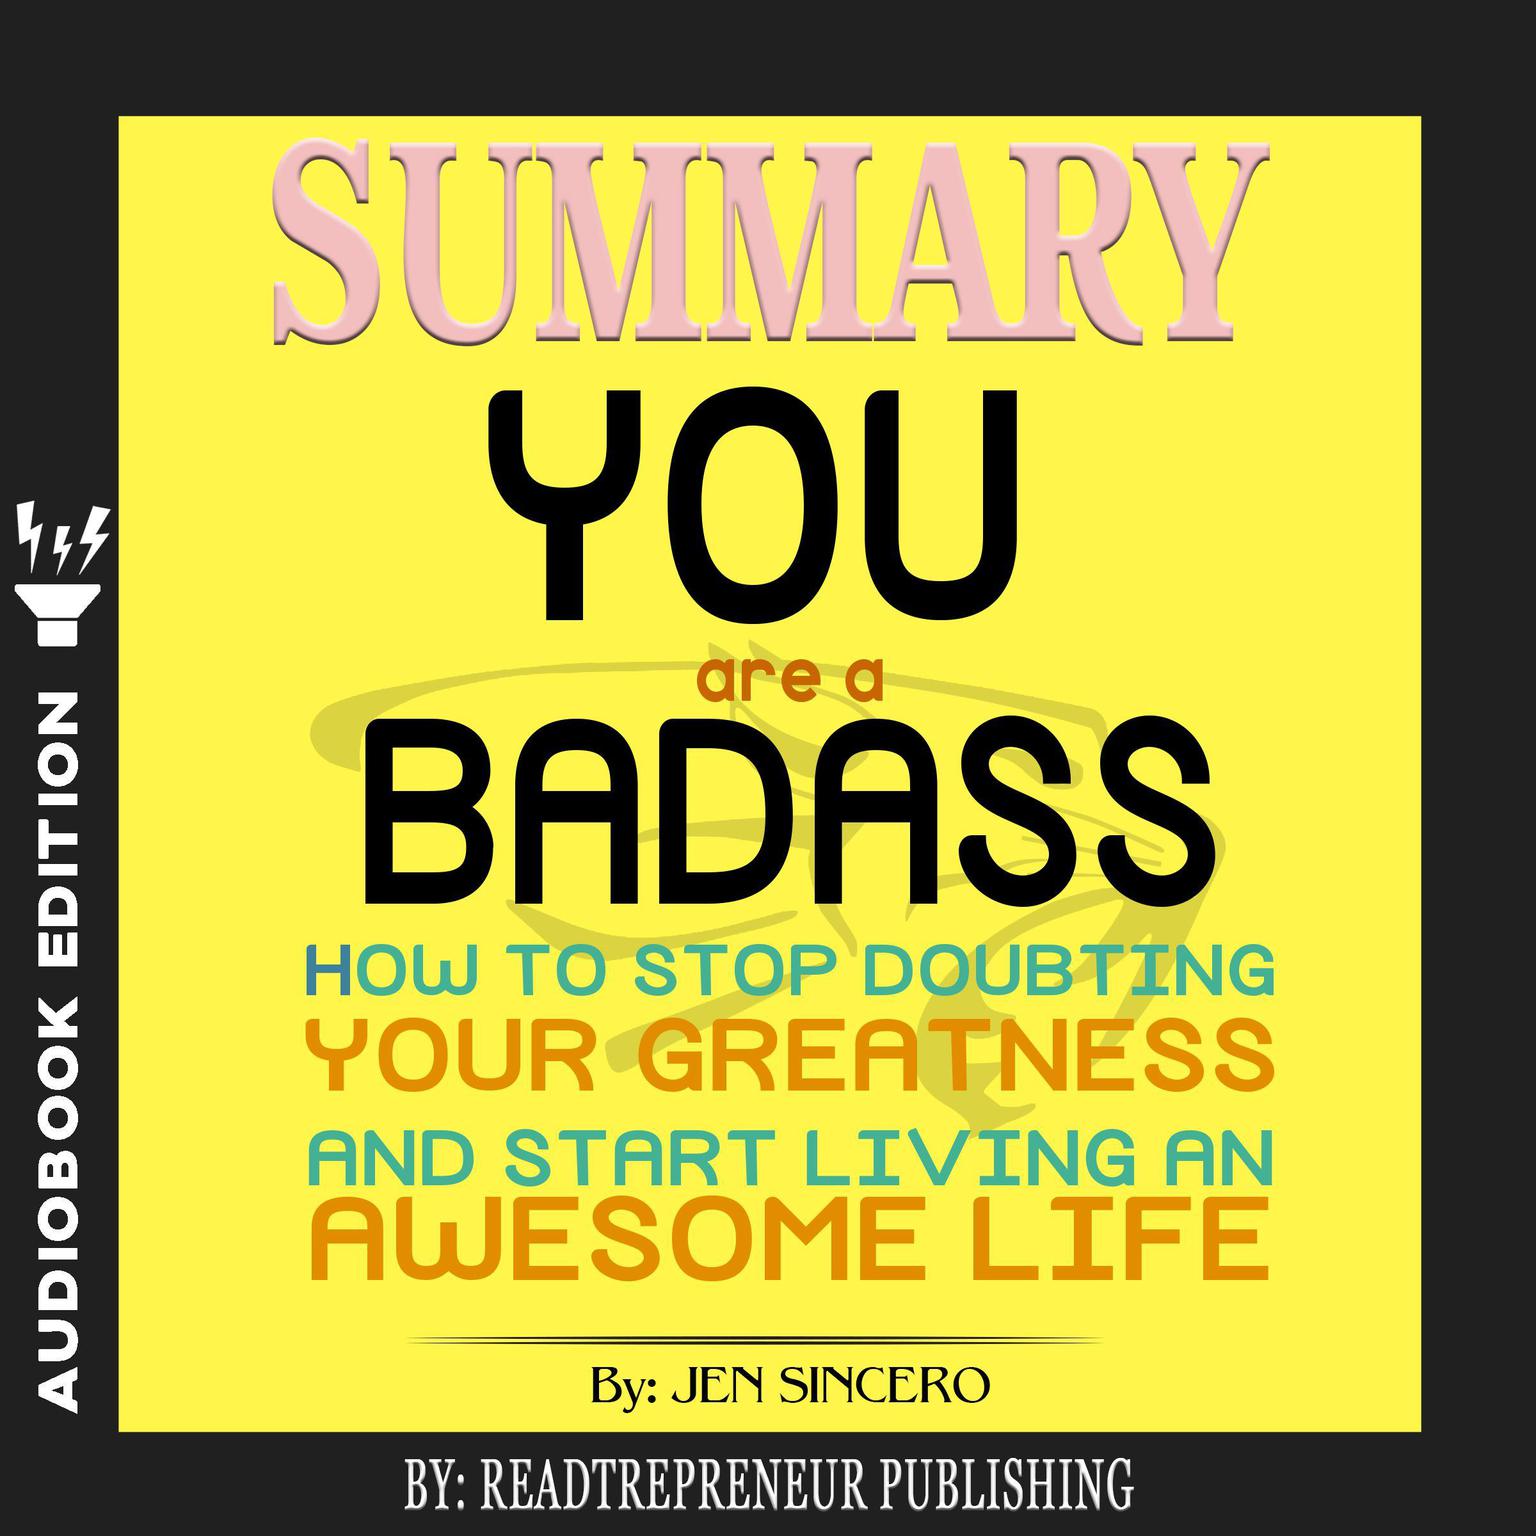 Summary of You Are a Badass: How to Stop Doubting Your Greatness and Start Living an Awesome Life by Jen Sincero Audiobook, by Readtrepreneur Publishing